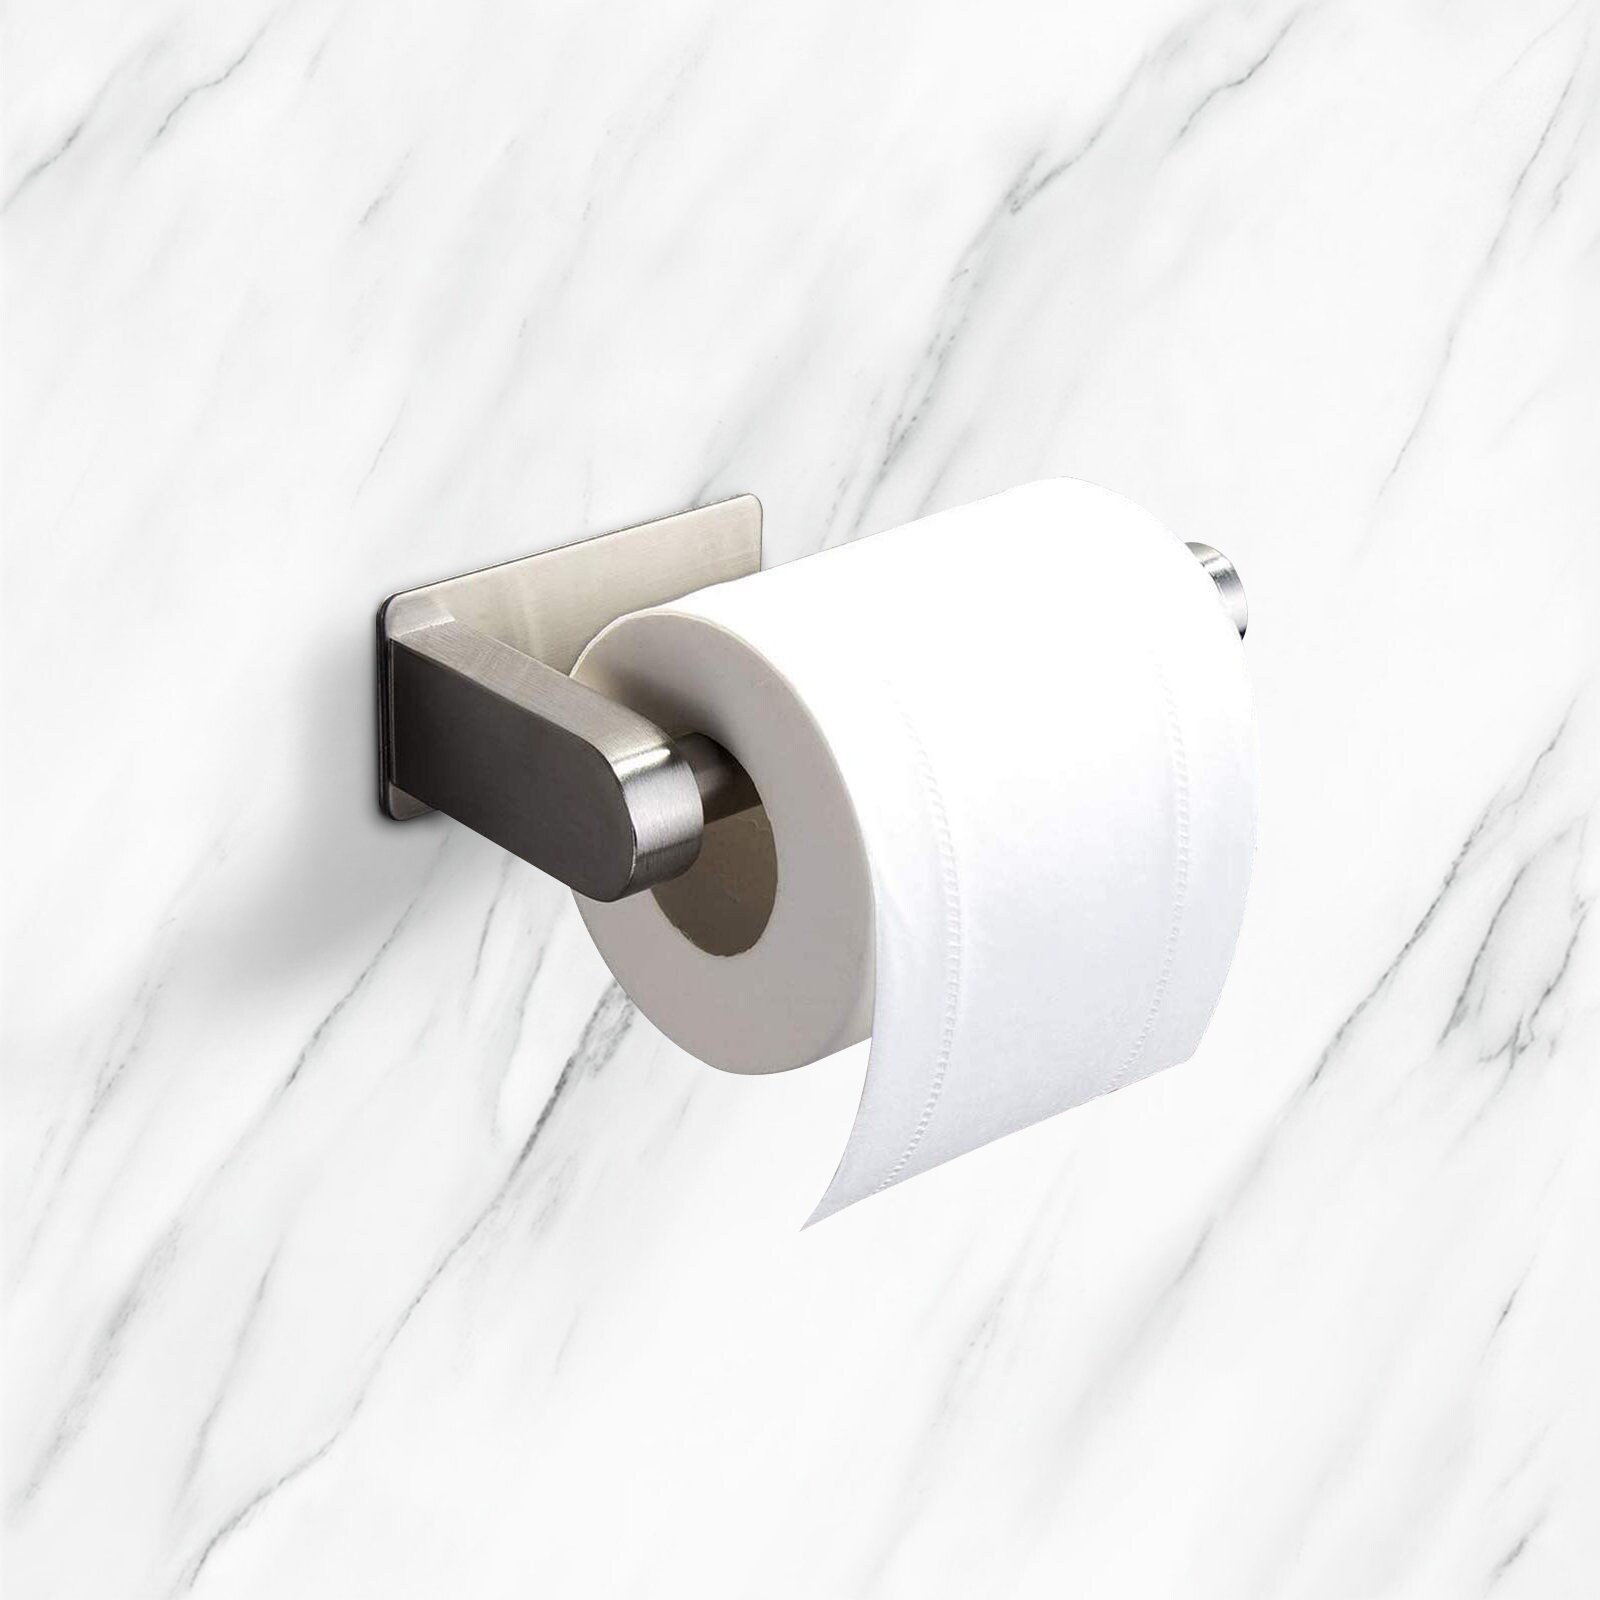 Toilet Paper Holder with Cover Brushed Nickel Toilet Tissue Roll Dispenser  Bathroom Storage Dust-Proof (Color : 4 PCS)